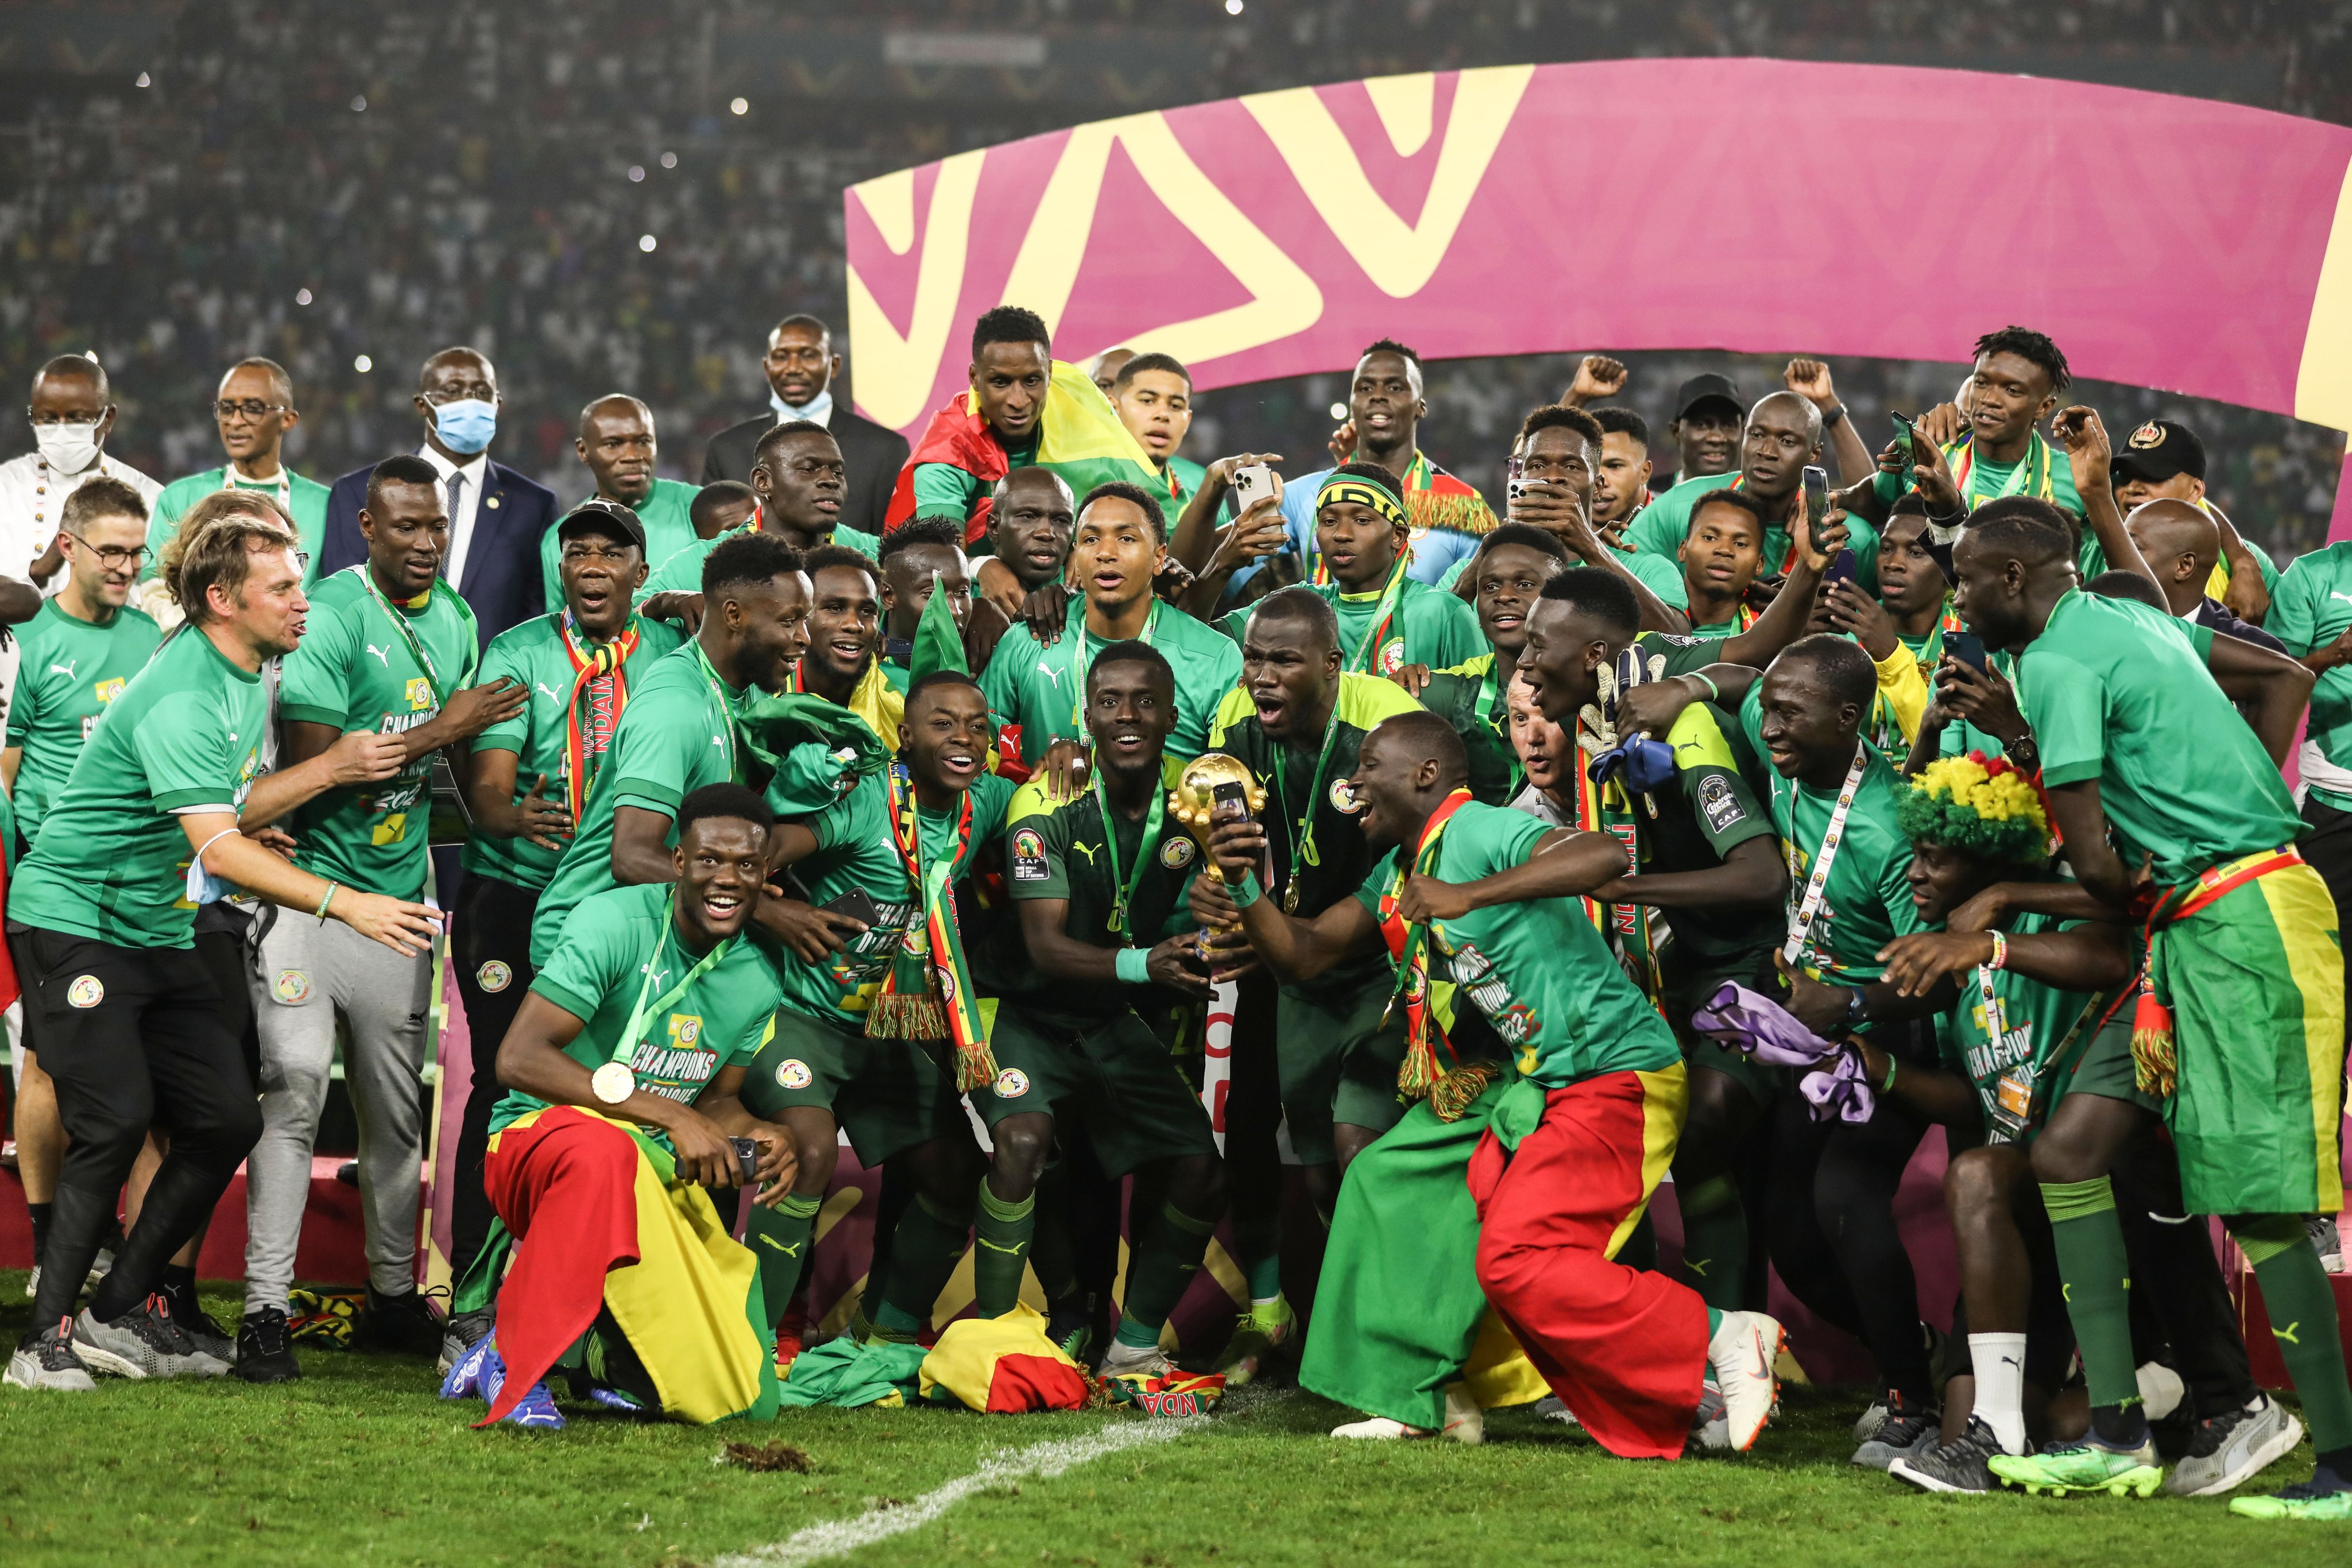 Senegal AFCON Winners 2021: Senegal win their first-ever AFCON title after beating Egypt on penalties in AFCON Finals; Sadio Mane wins Player of the Tournament